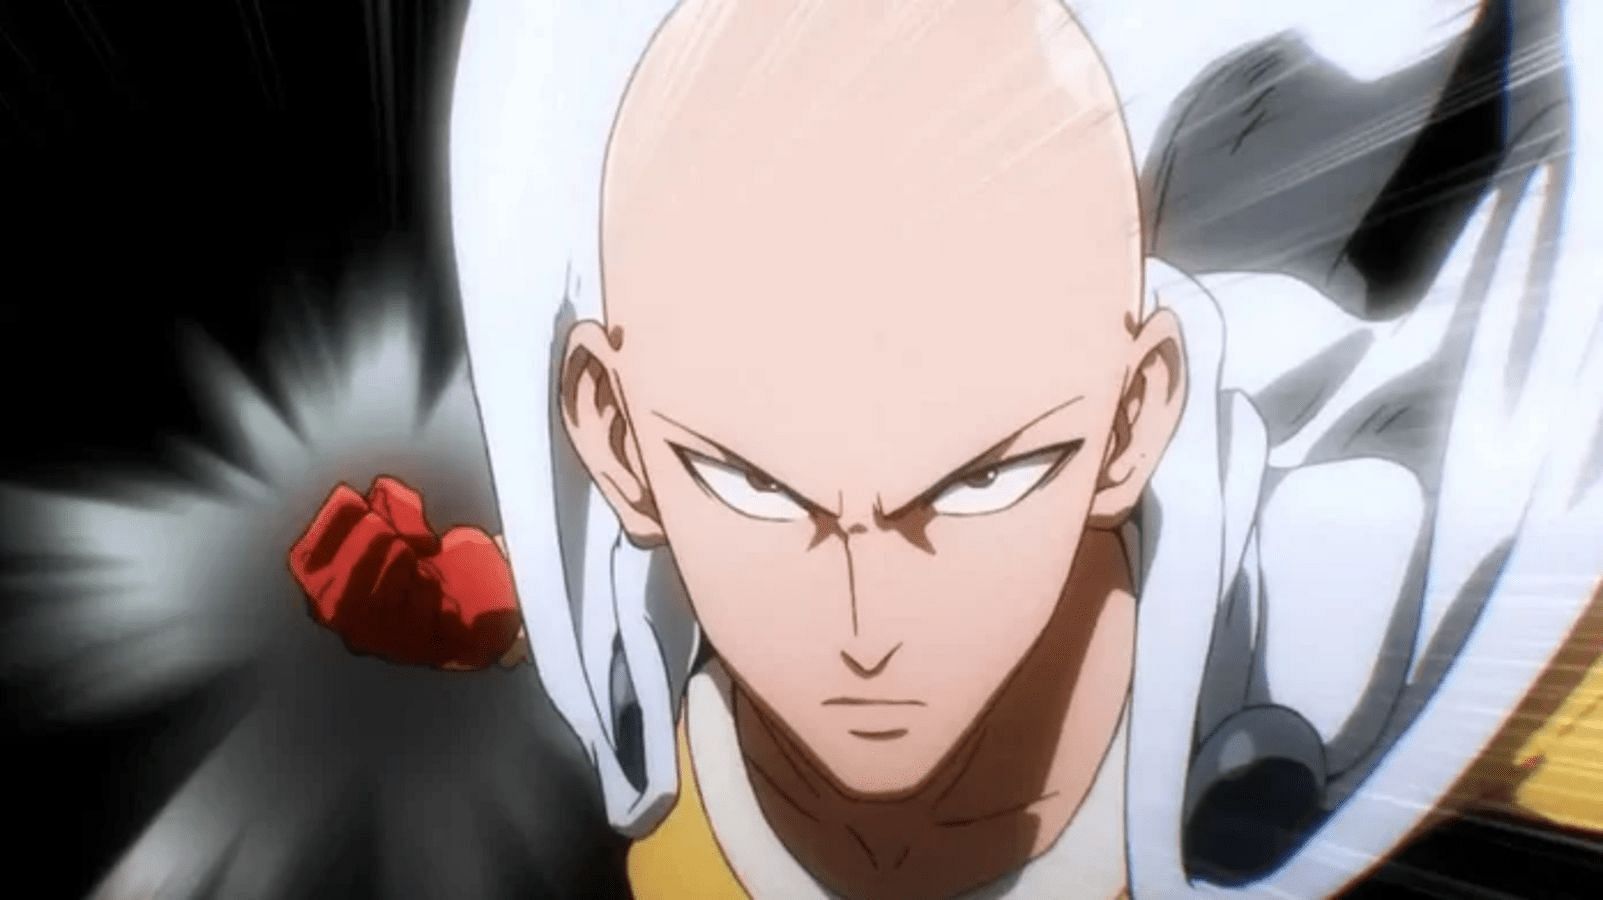 Saitama&#039;s Serious Punch as seen in One Punch Man (image via Studio Madhouse)